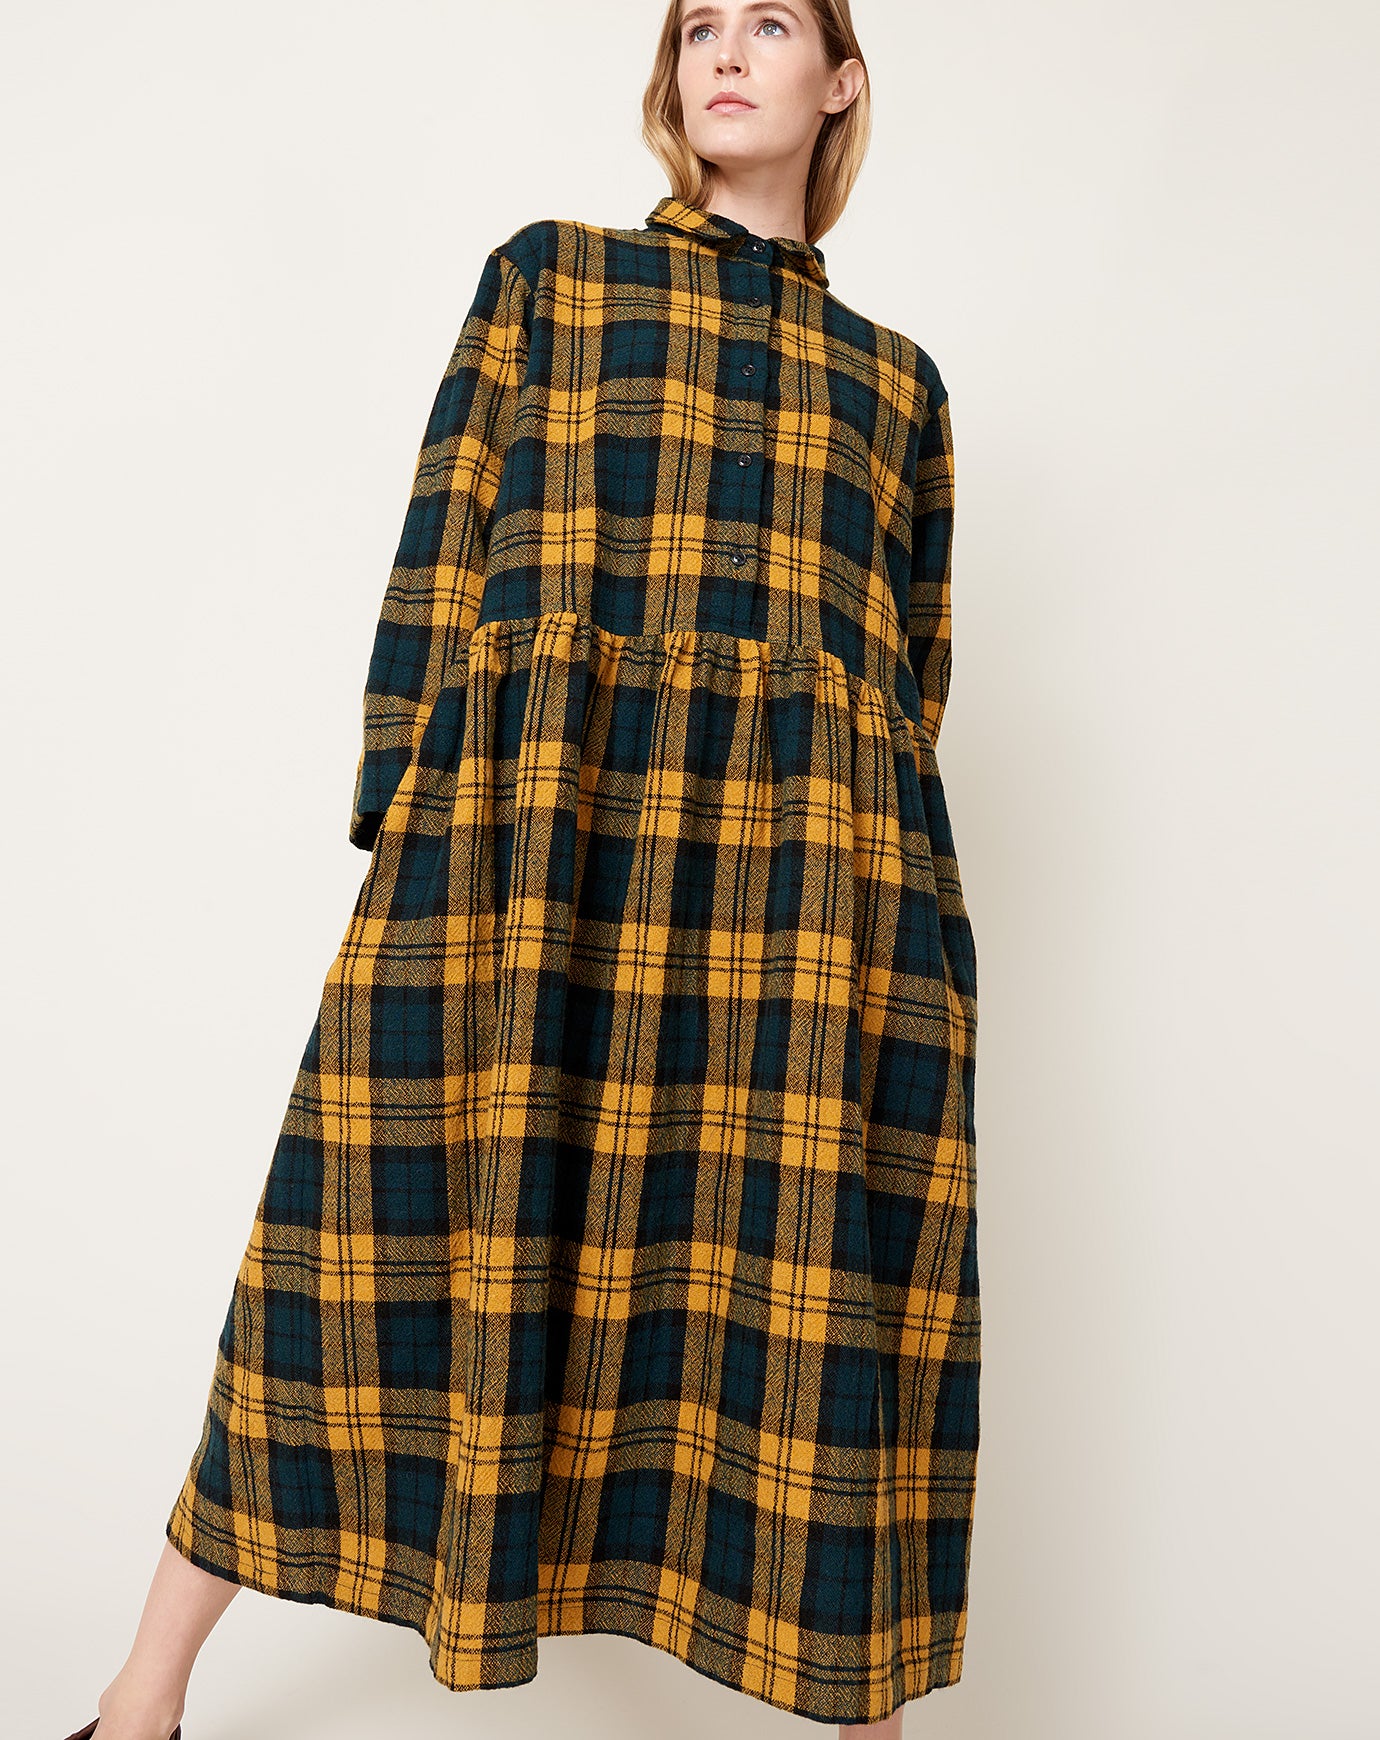 Ichi Wool Plaid Dress in Yellow and Green